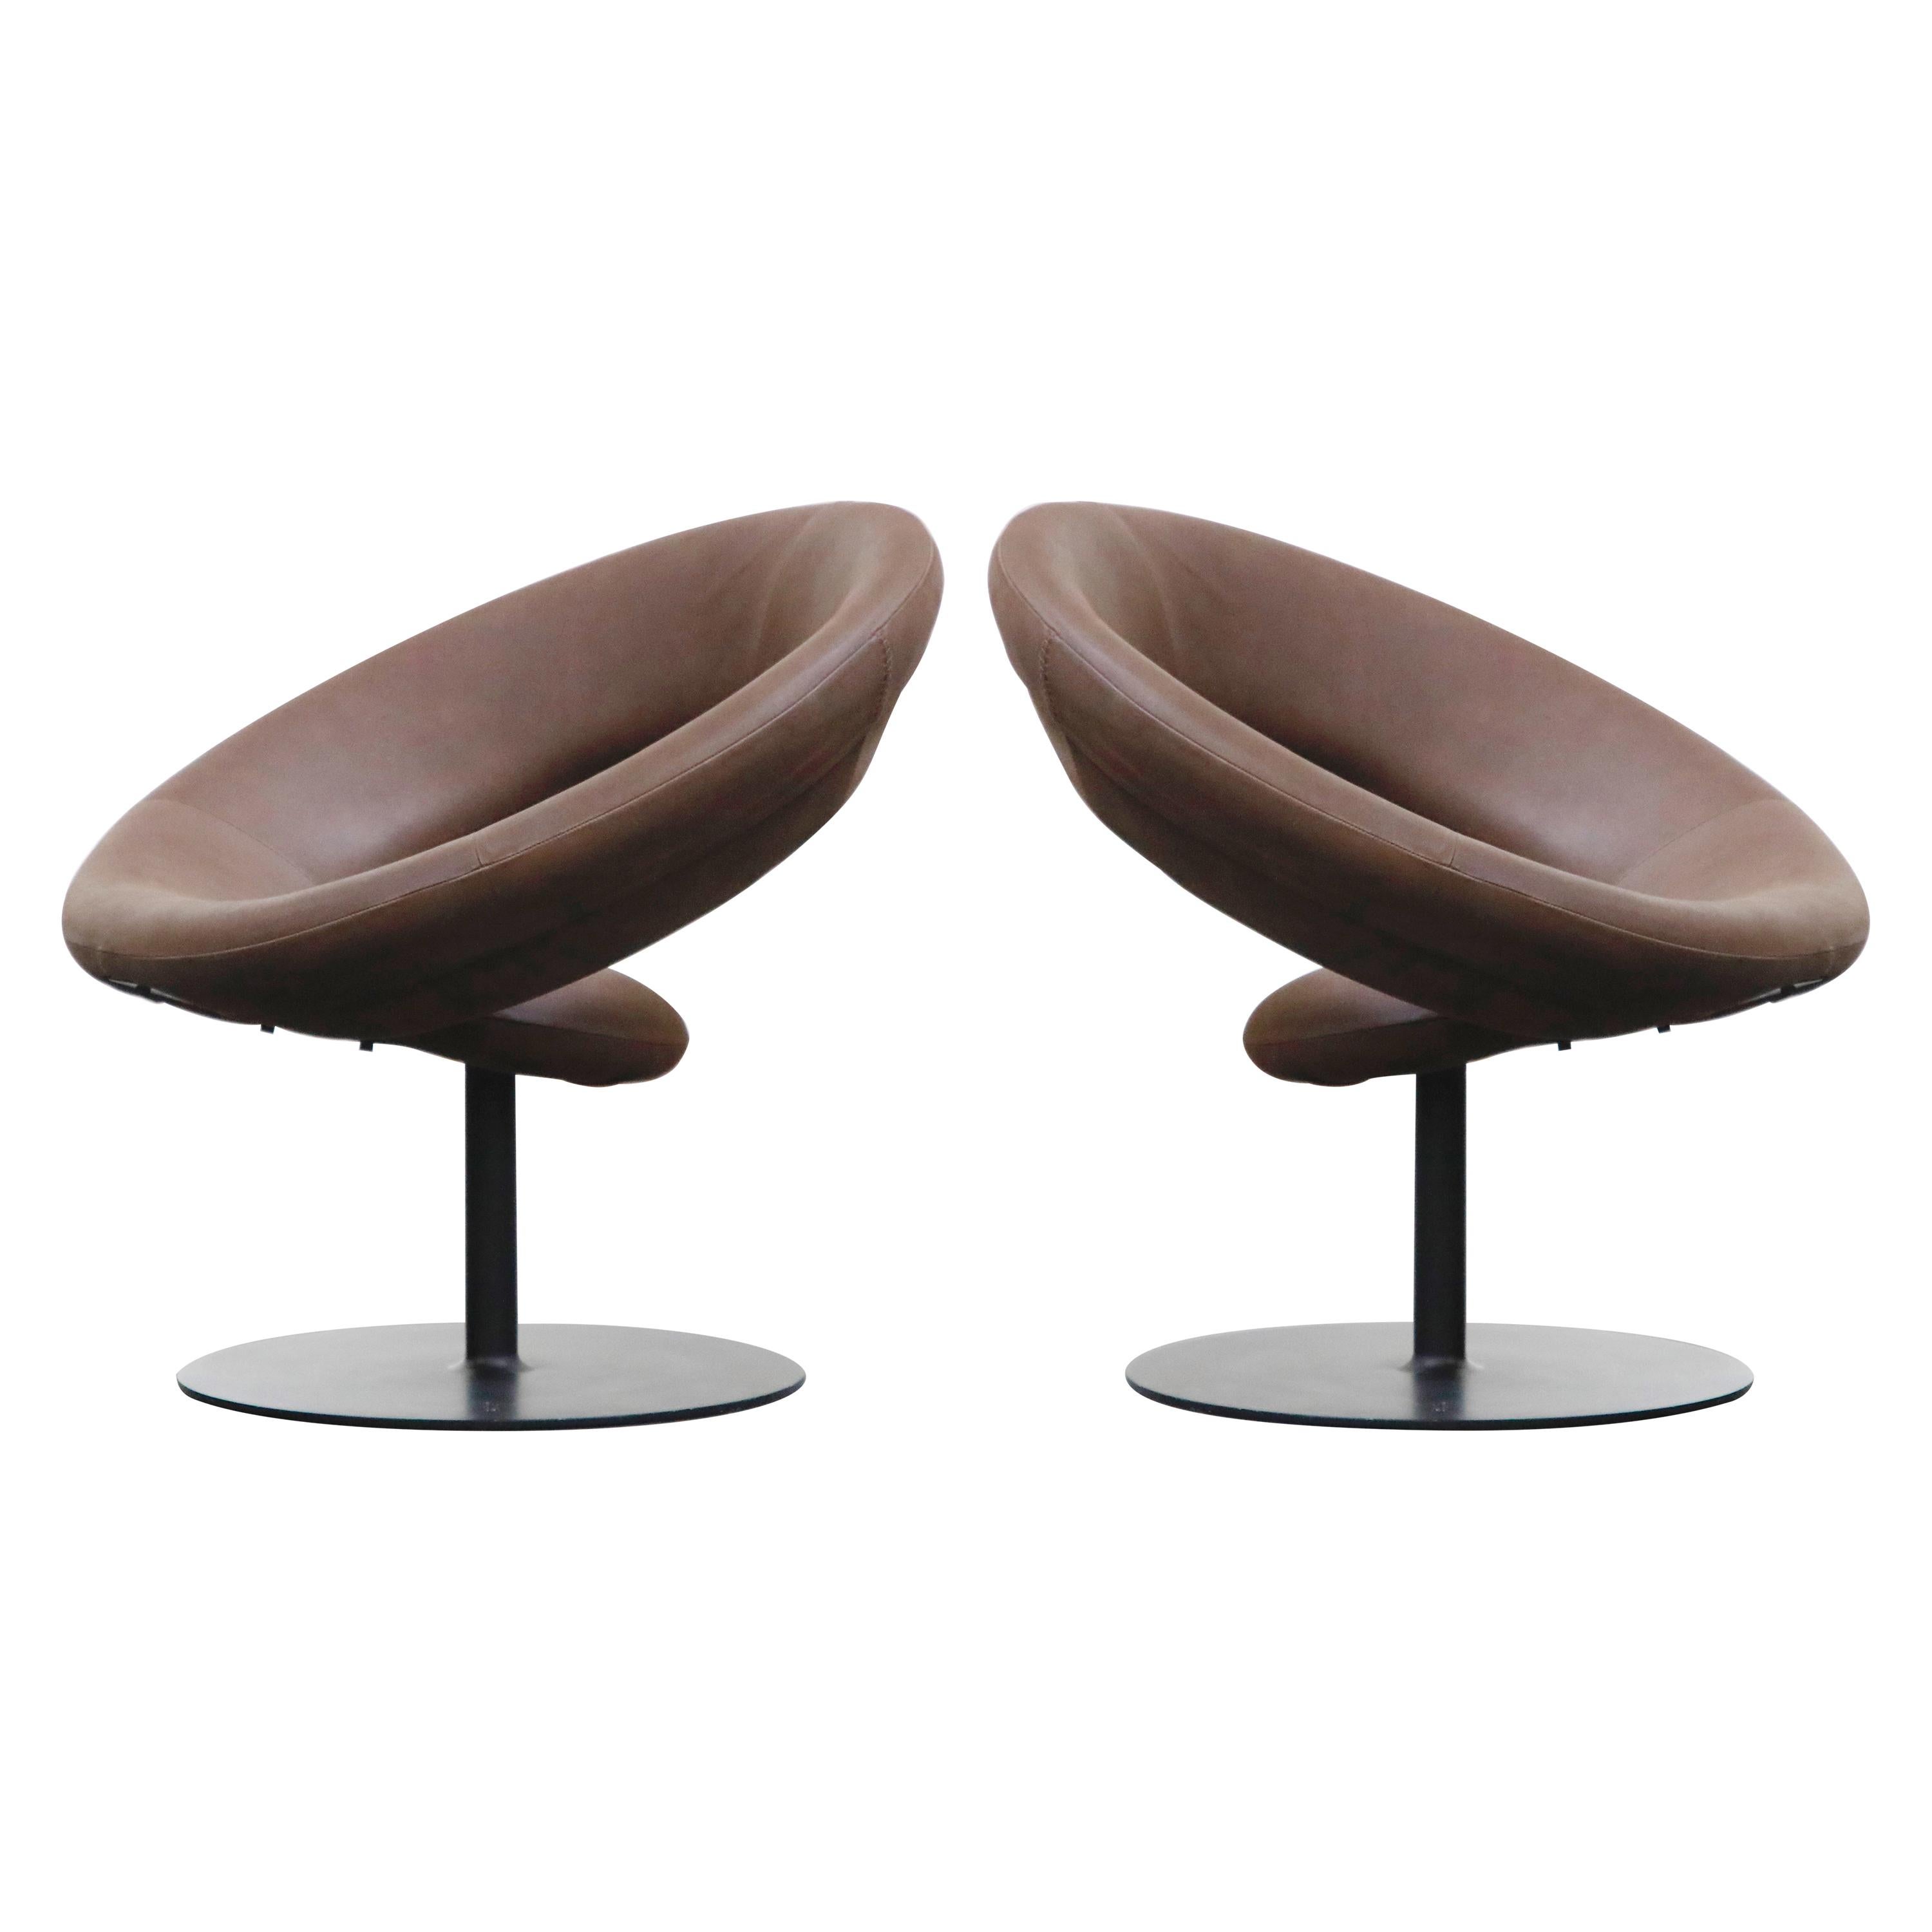 Ricardo Fasanello 'Anel' Leather Lounge Swivel Chairs, 1987, Signed Pair